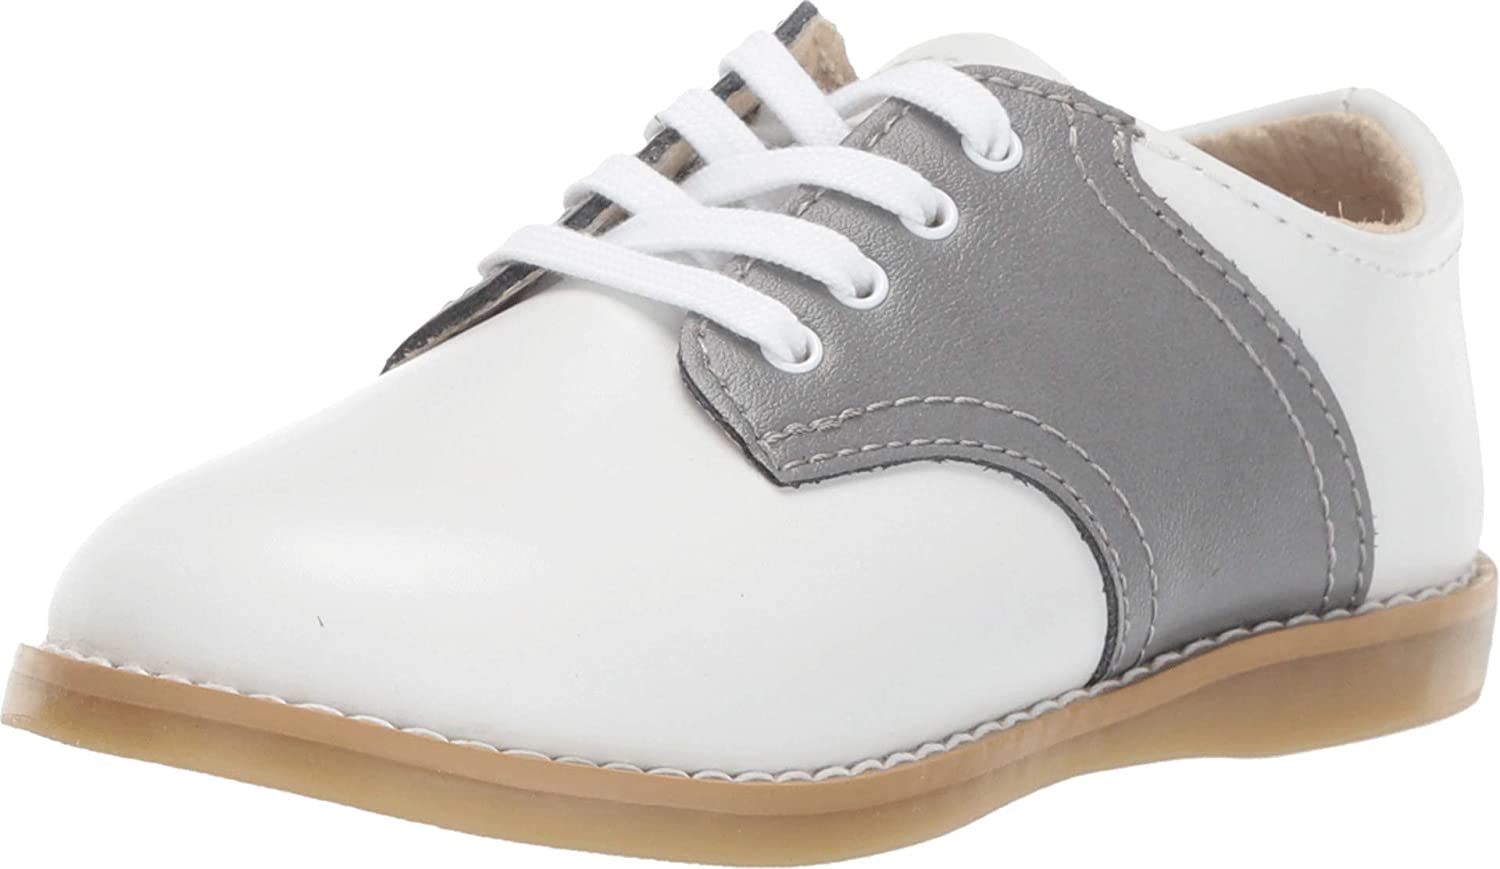 Footmates Cheer Infant Shoe (age 0-24 months) in White/Gray view from the front